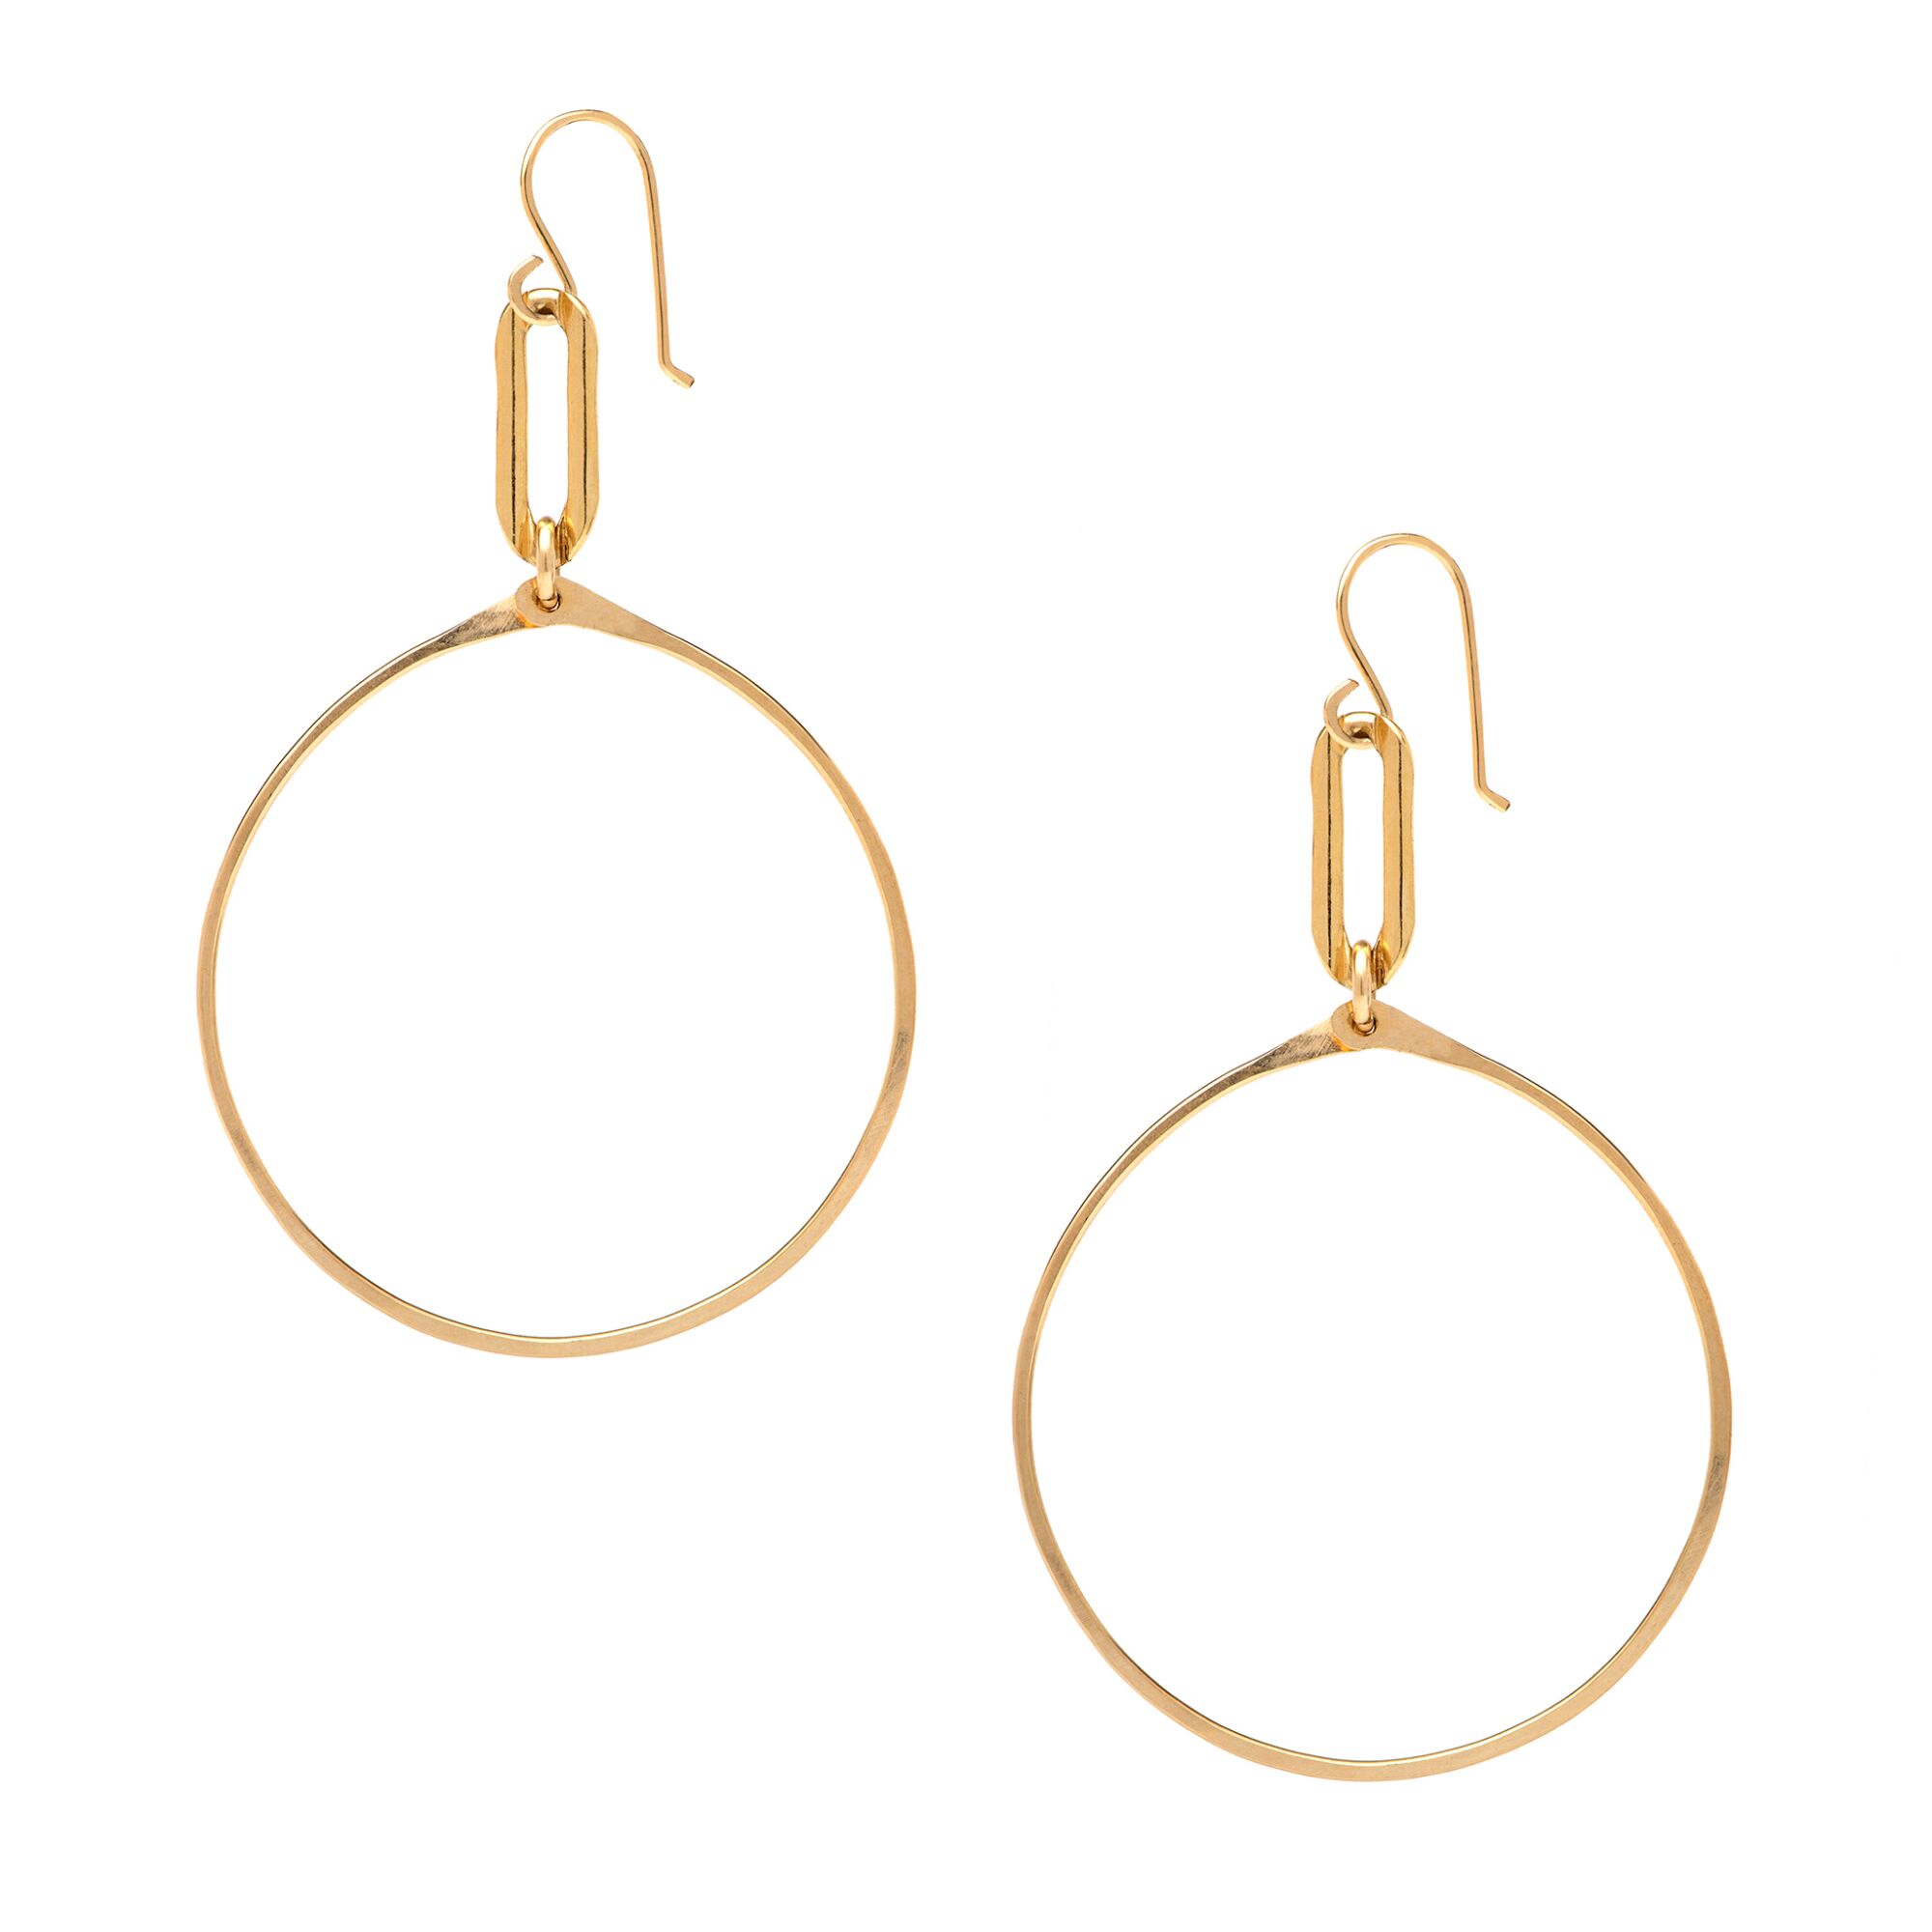  A pair of gold earrings.